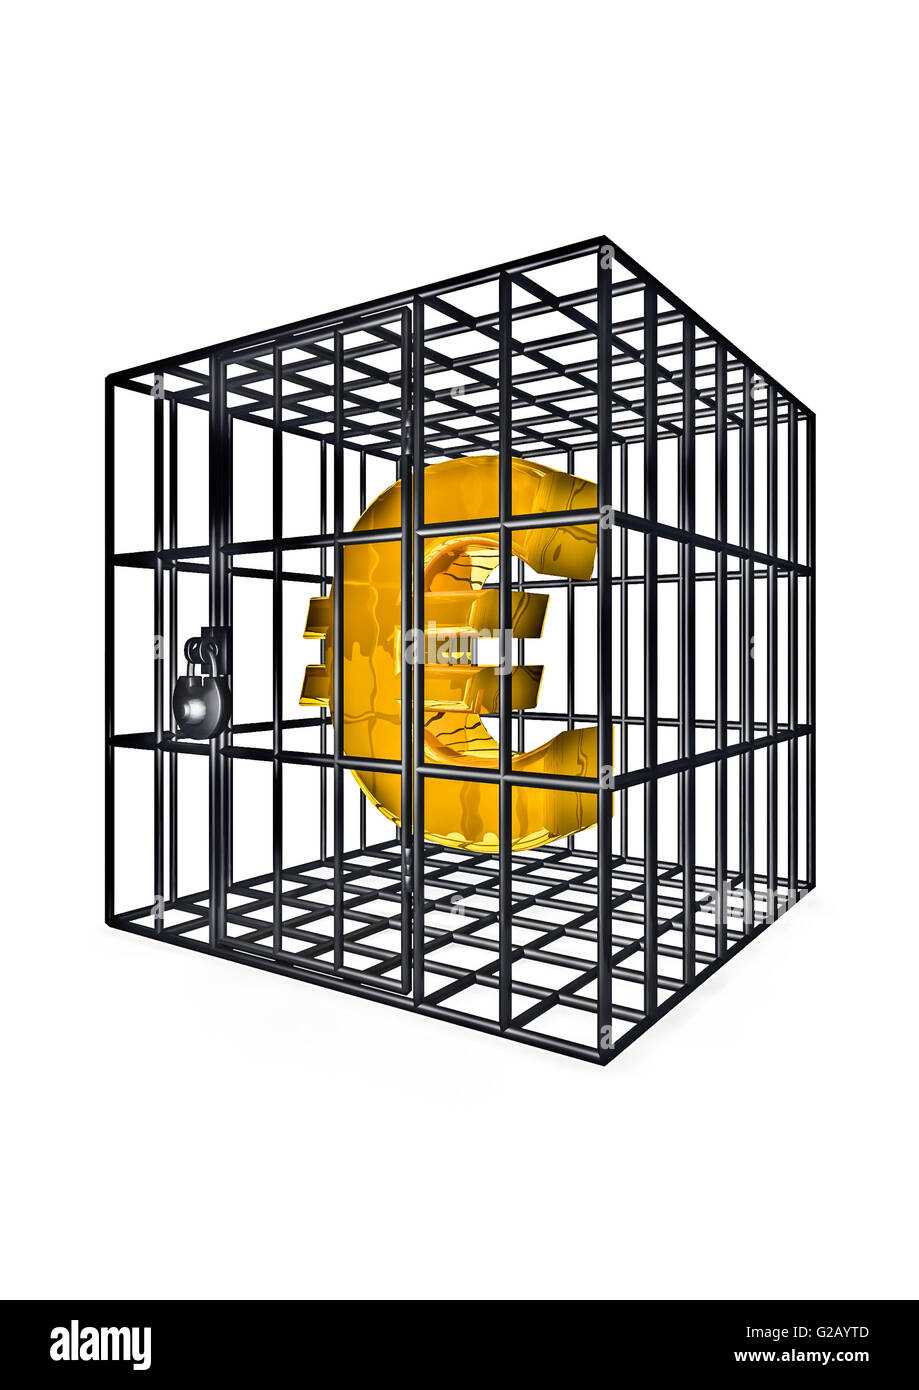 Caged euro / 3D render of euro symbol in metal cage Stock Photo